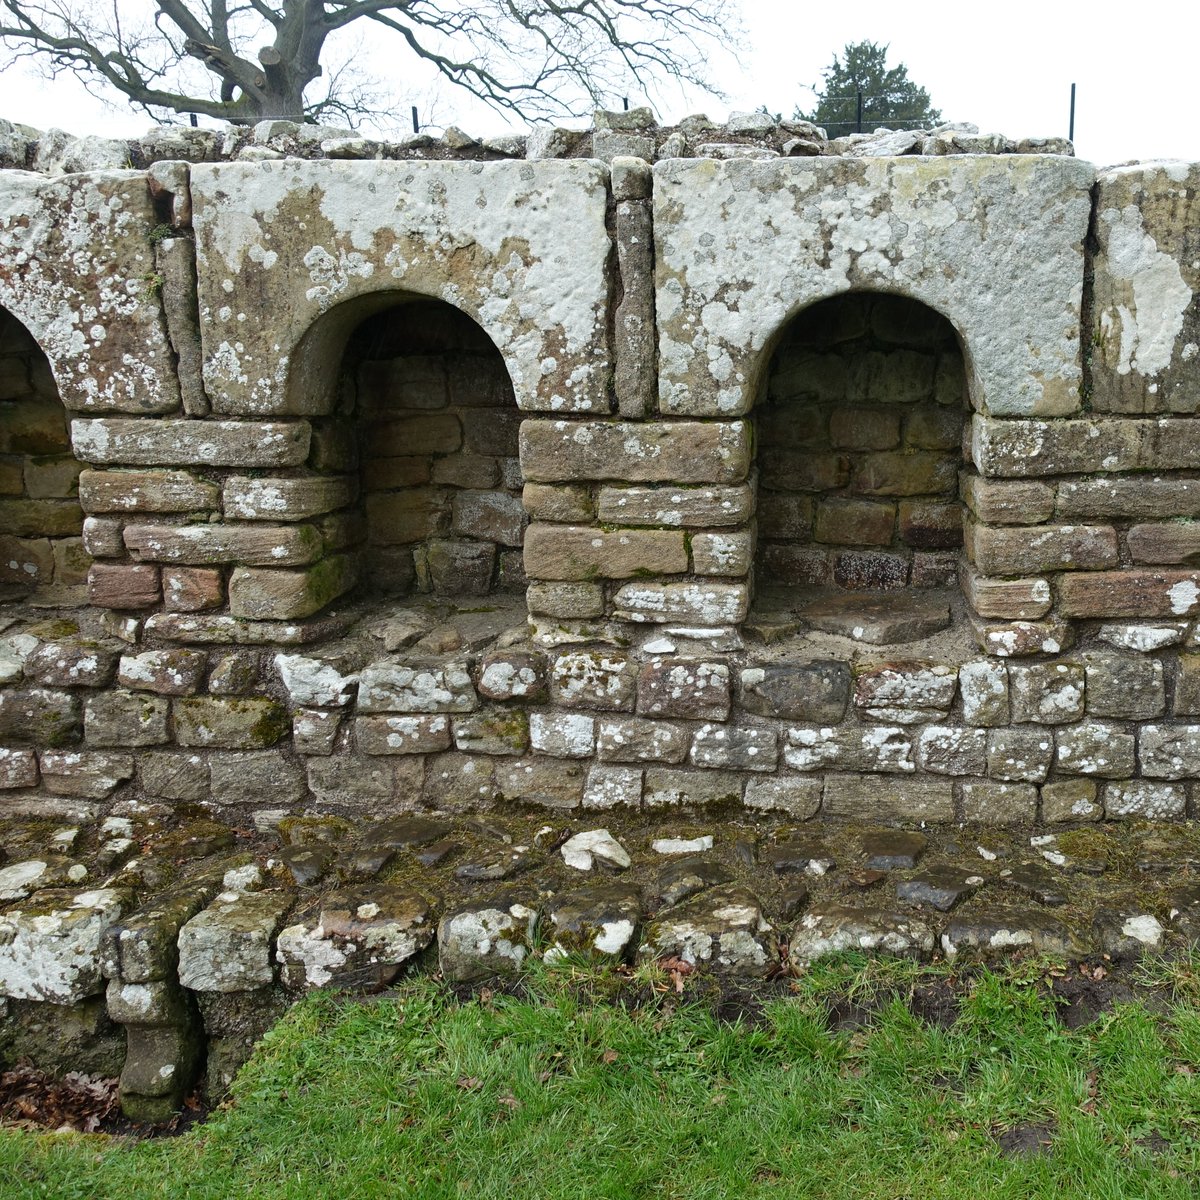 The architectural features of the bathhouse at the Roman fort of Chesters on Hadrian's Wall are quite astounding - you can still see locker niches, door frames and high walls at this remarkably well-preserved site #RomanFortThursday